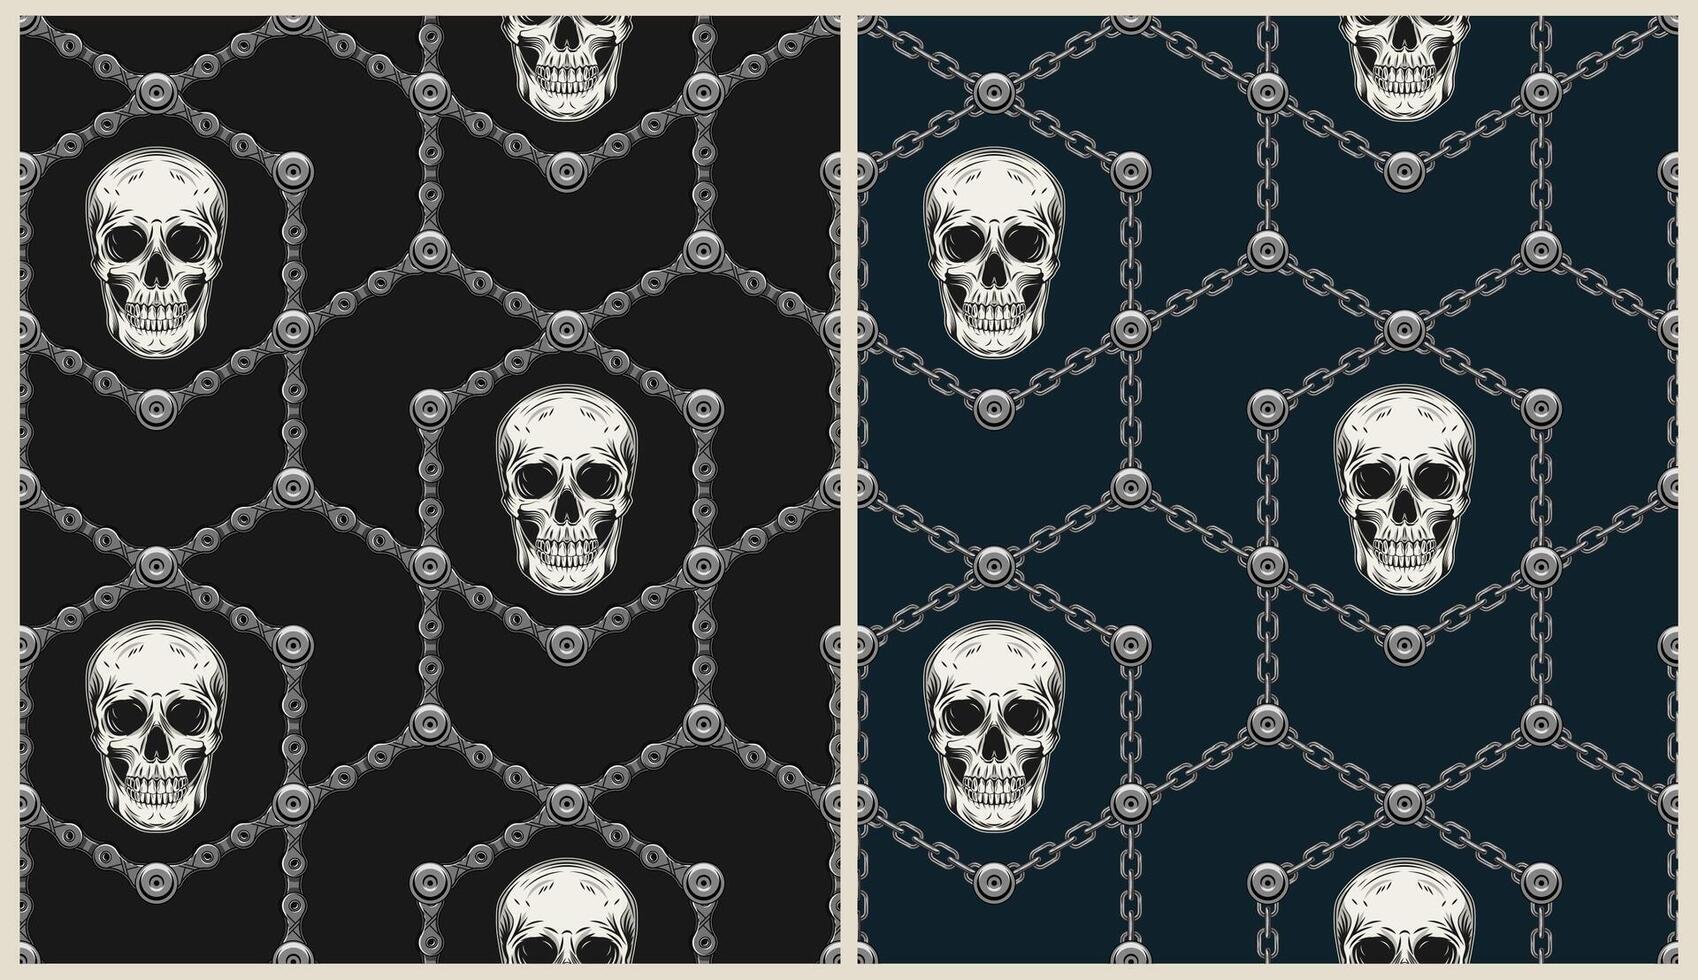 Geometric pattern with human skulls, steel chains, bicycle chain, rivets. Tile polygonal seamless background in steampunk style. Good for apparel, clothing, fabric, textile, sport goods. vector